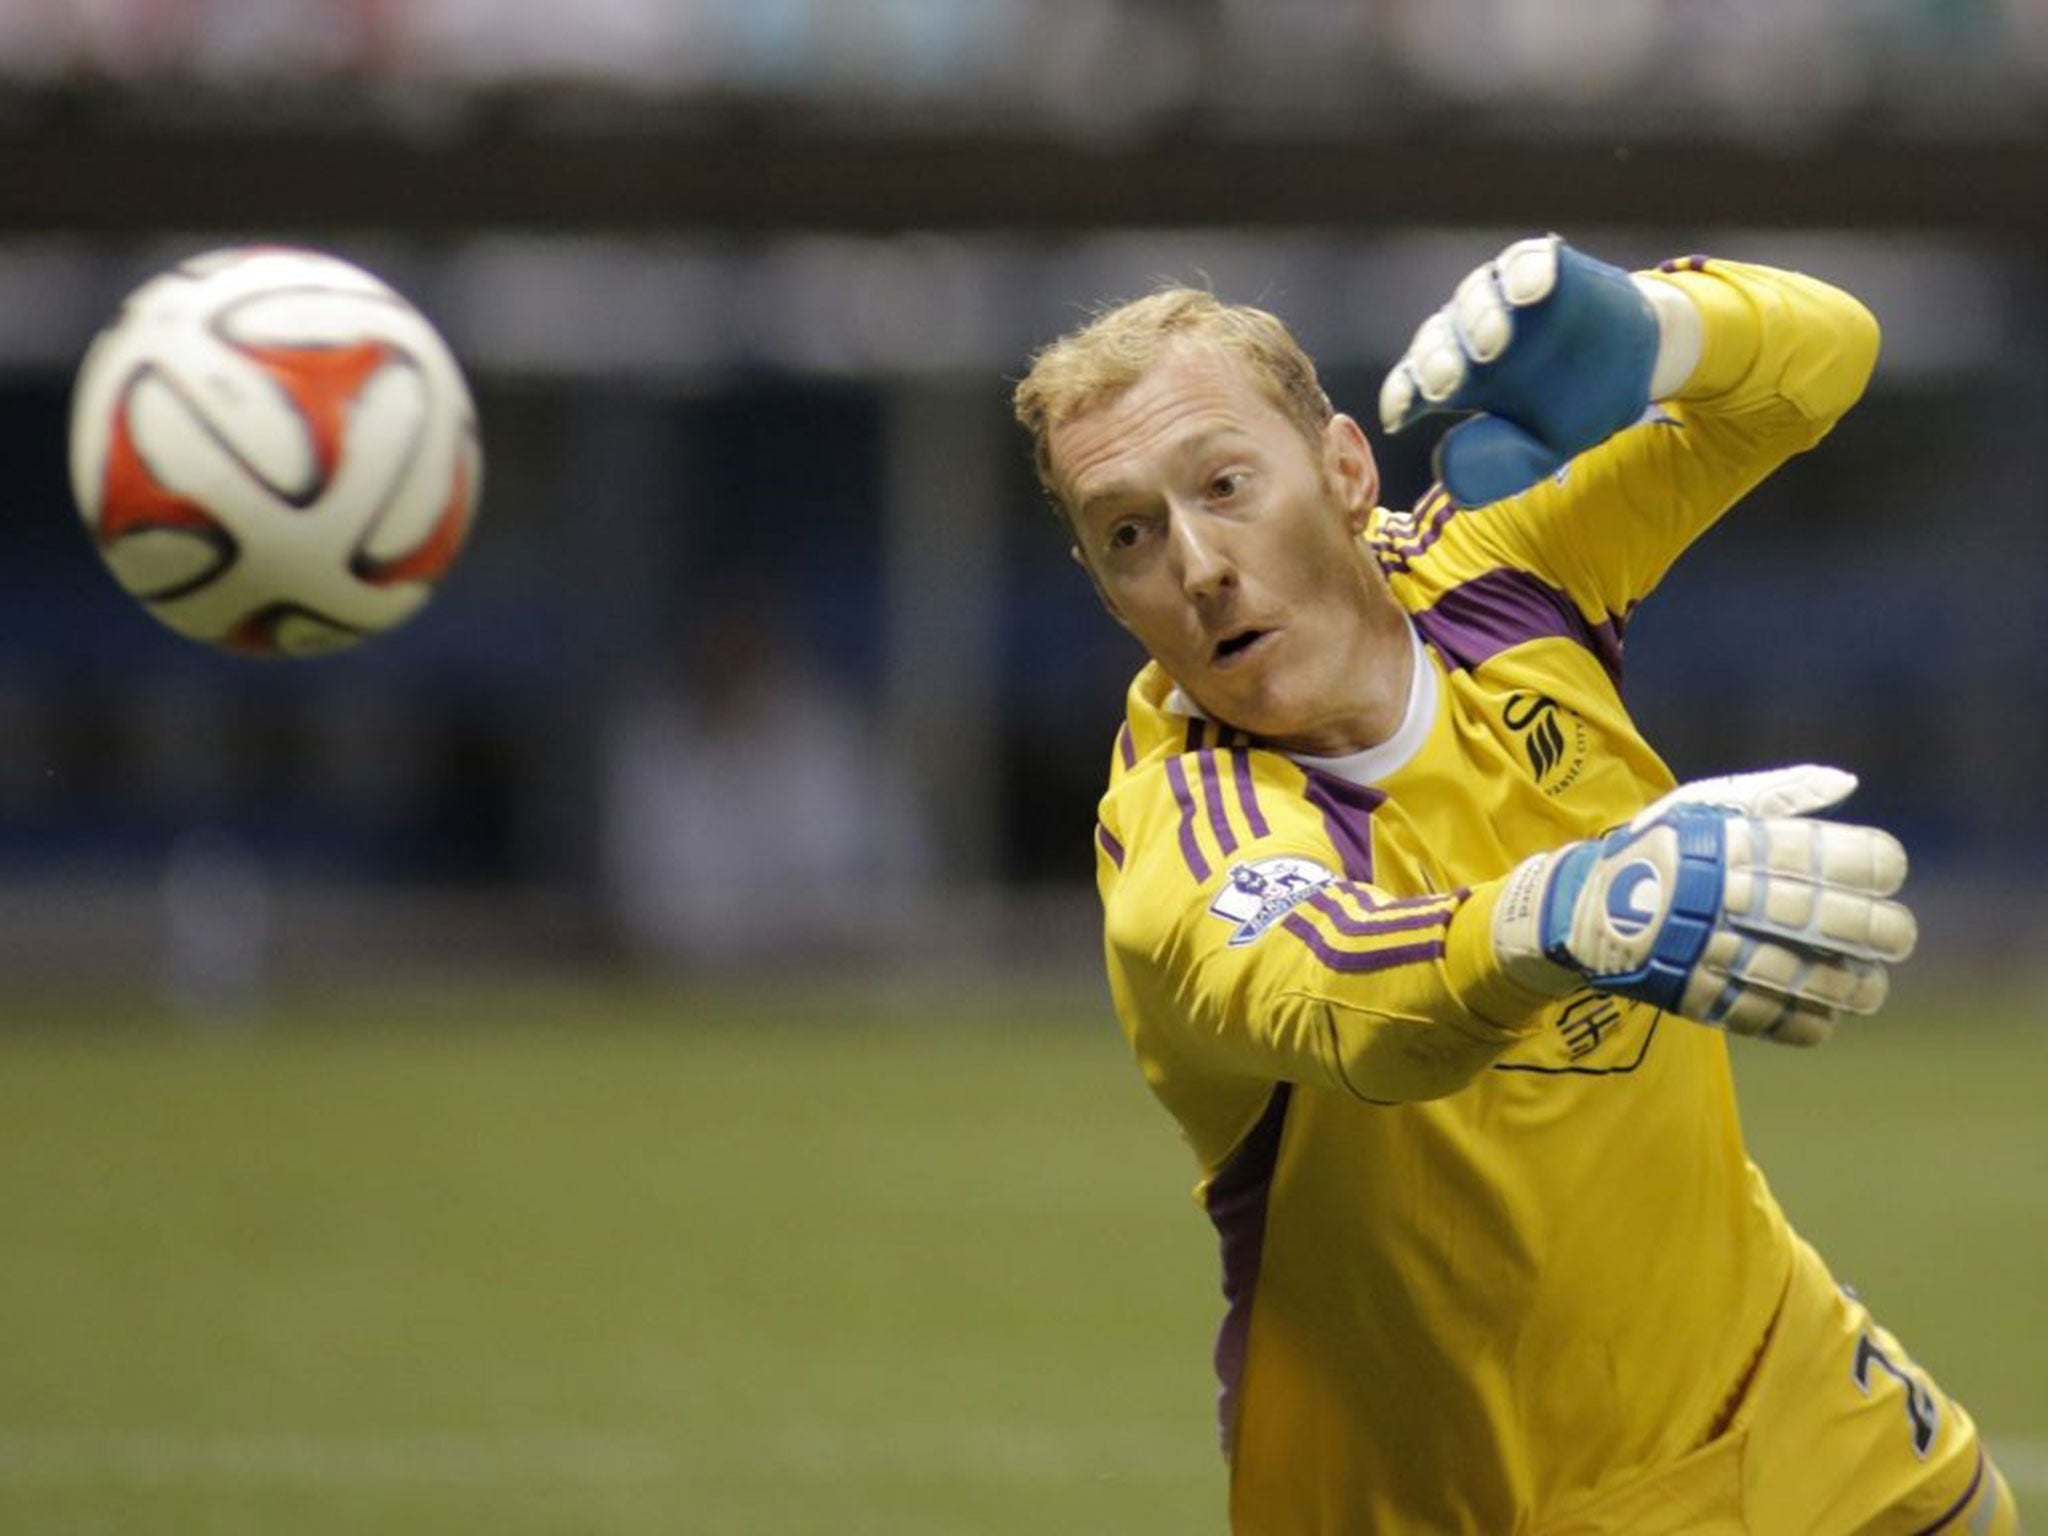 Swansea City goalie Gerhard Tremmel attempts to block a shot on goal from Chivas De Guadalajara during the second half of a International League soccer match at Miller Park Wednesday, July 16, 2014, in Milwaukee.